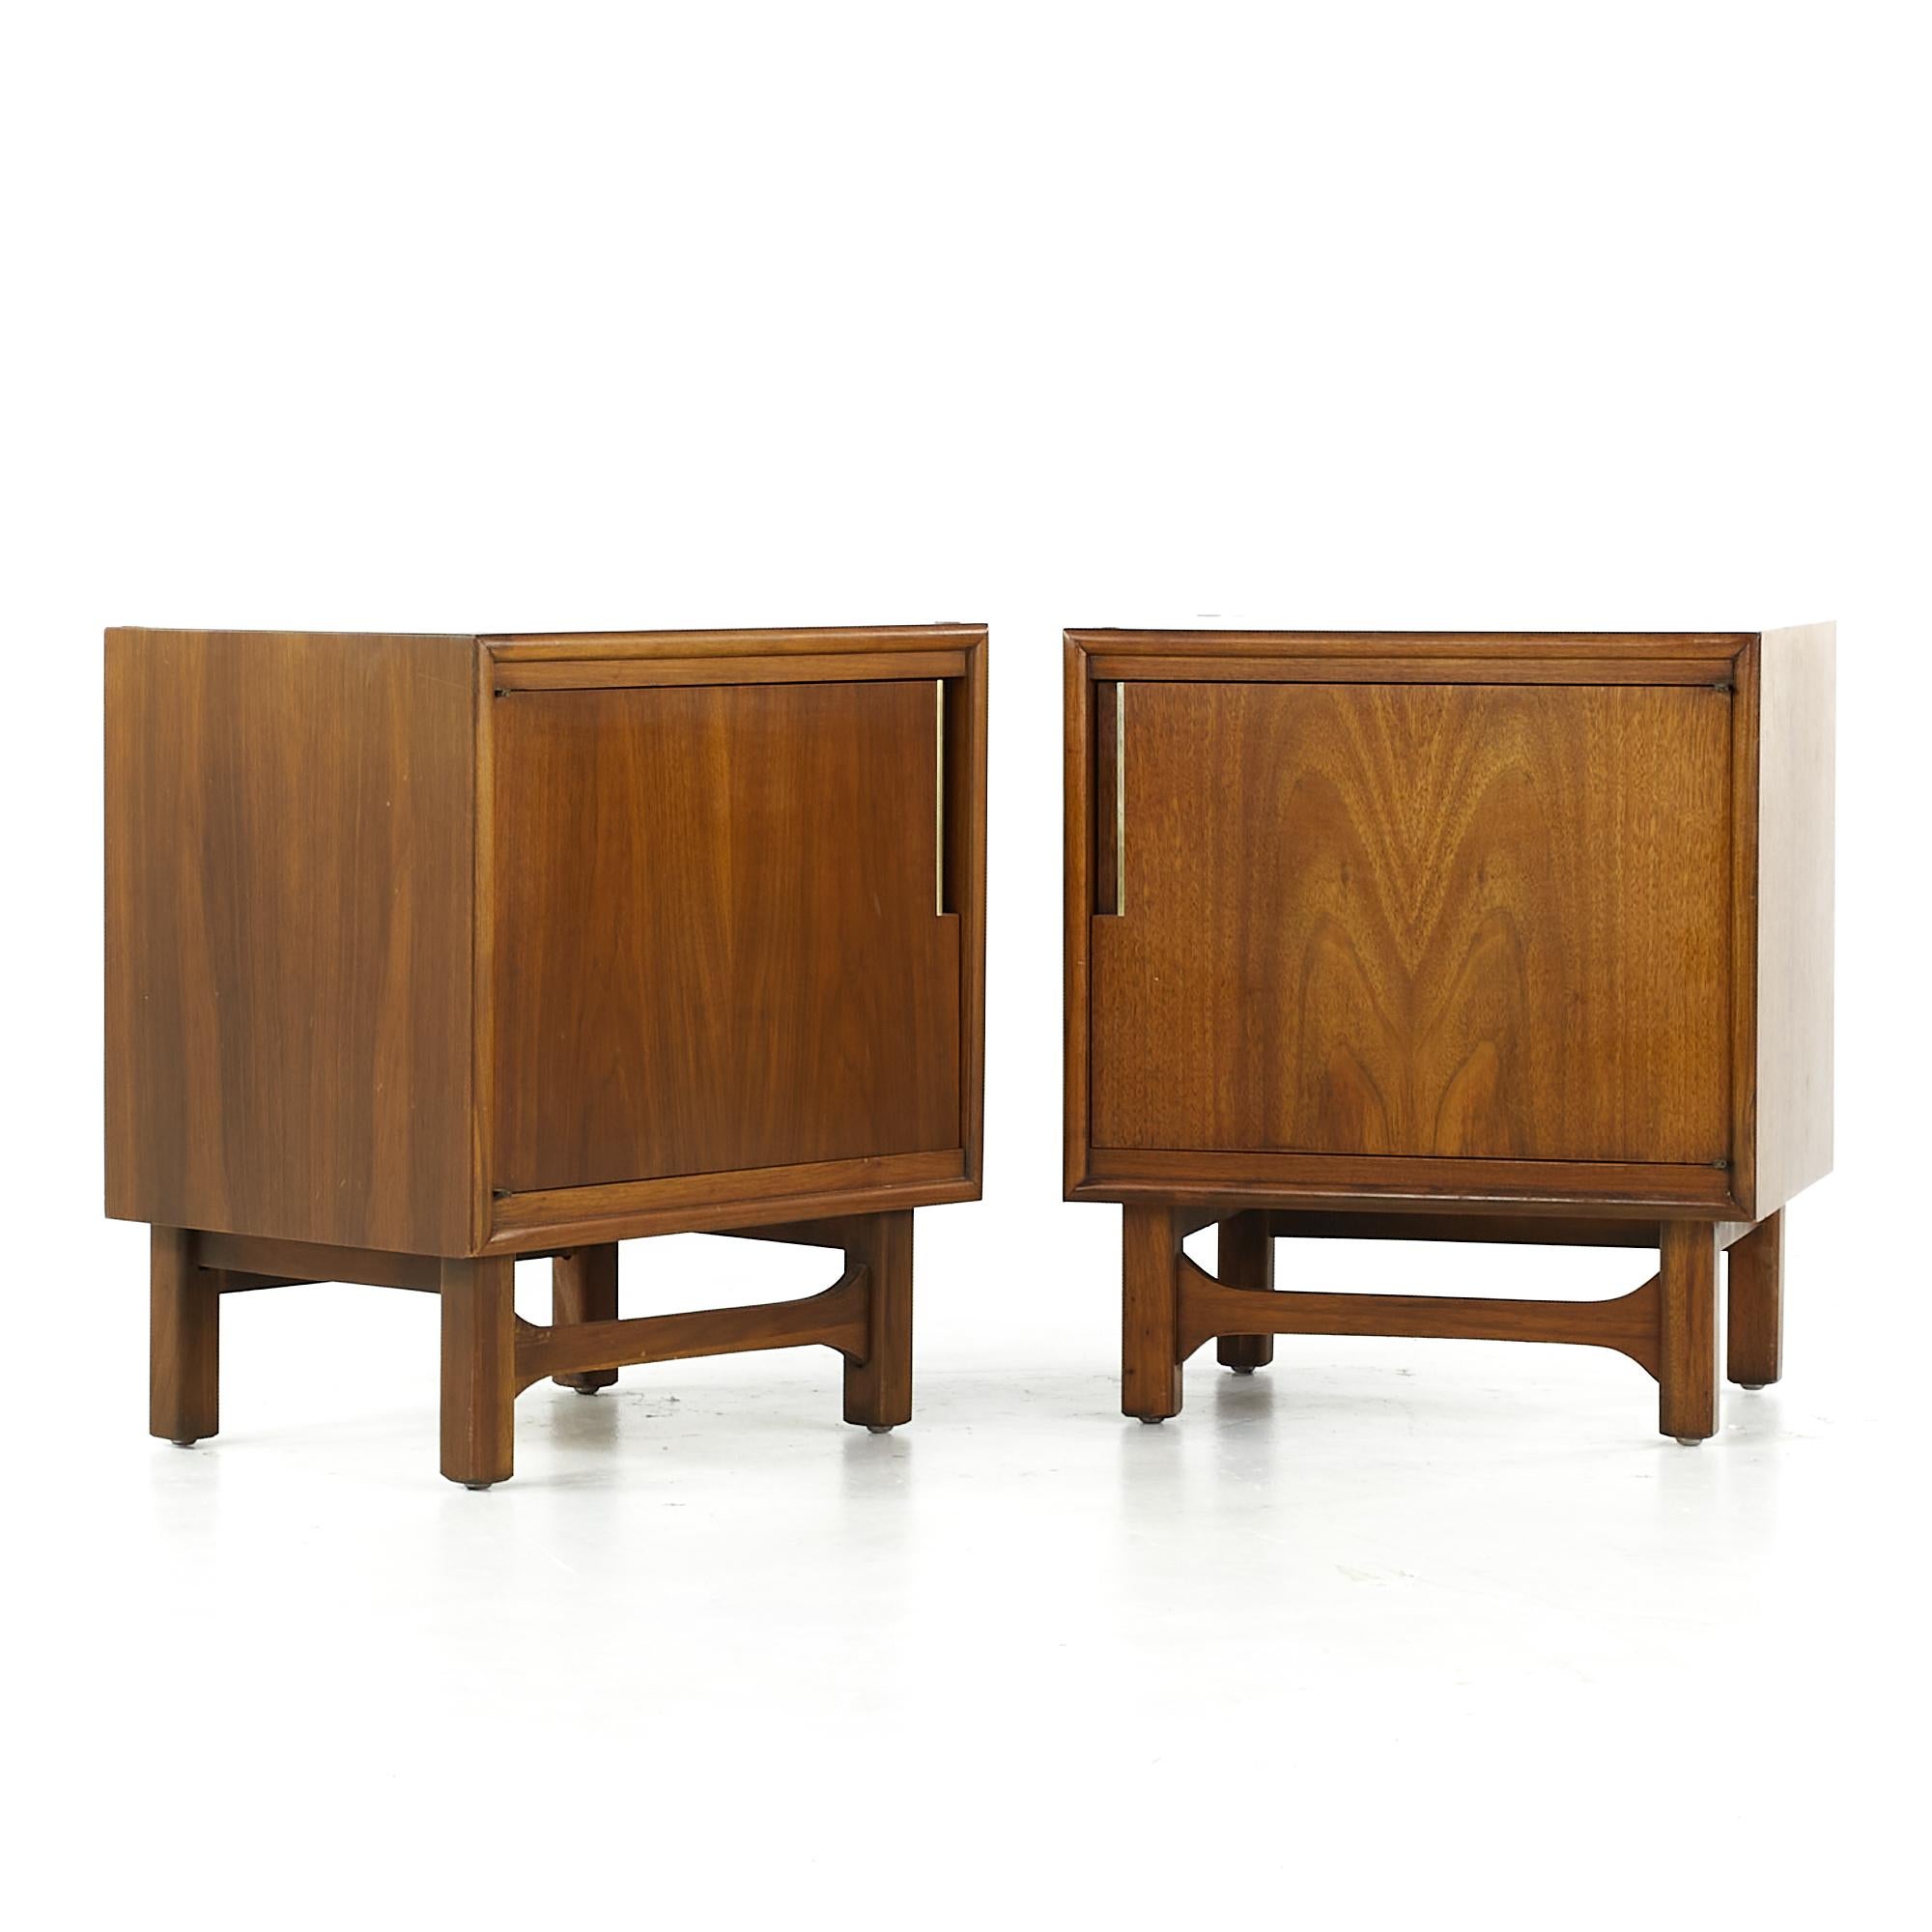 Cavalier Furniture midcentury walnut nightstand - pair.

Each nightstand measures: 21 wide x 16 deep x 24.25 inches high.

All pieces of furniture can be had in what we call restored vintage condition. That means the piece is restored upon